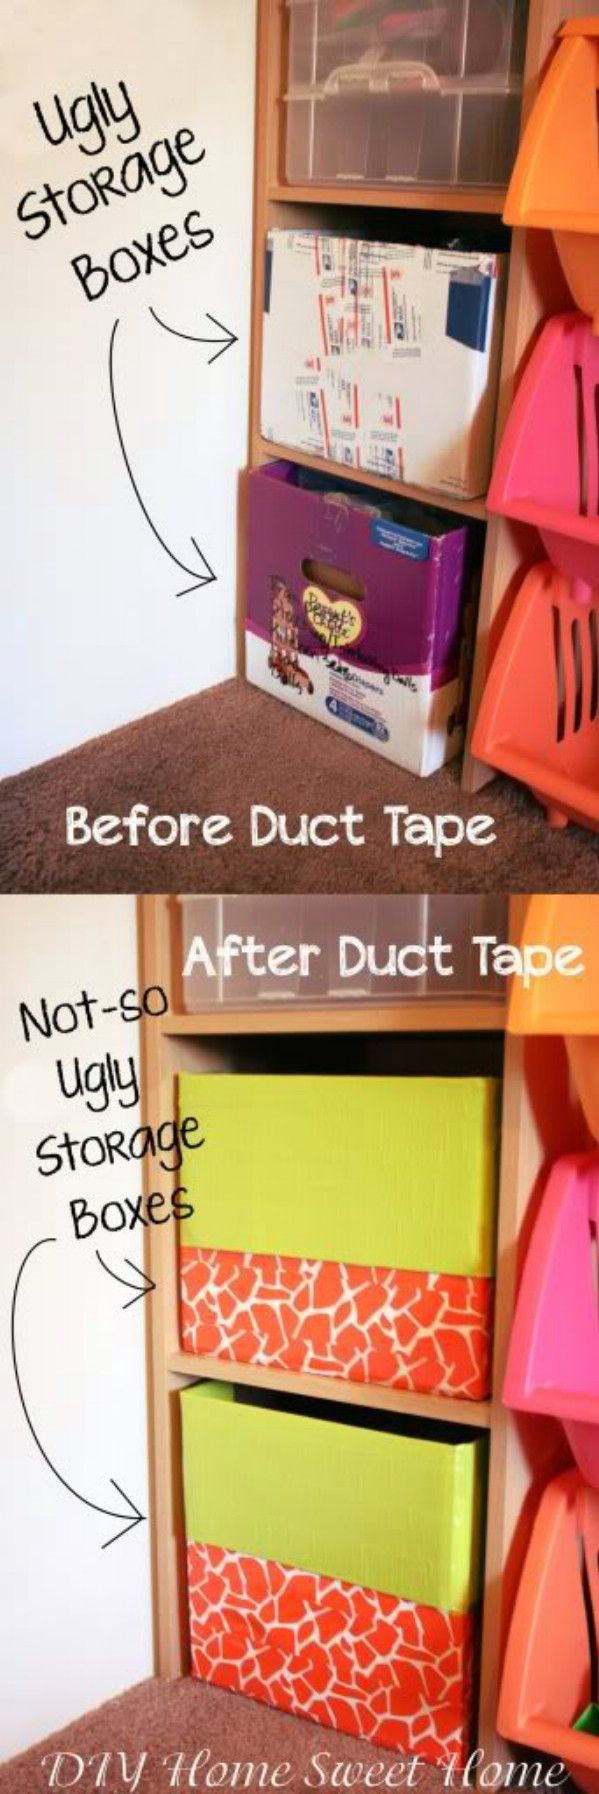 Use Colorful Duct Tape -   Brilliant Garage Organization ideas that will make life easier. Great ideas, tips, tutorials for insanely easy garage